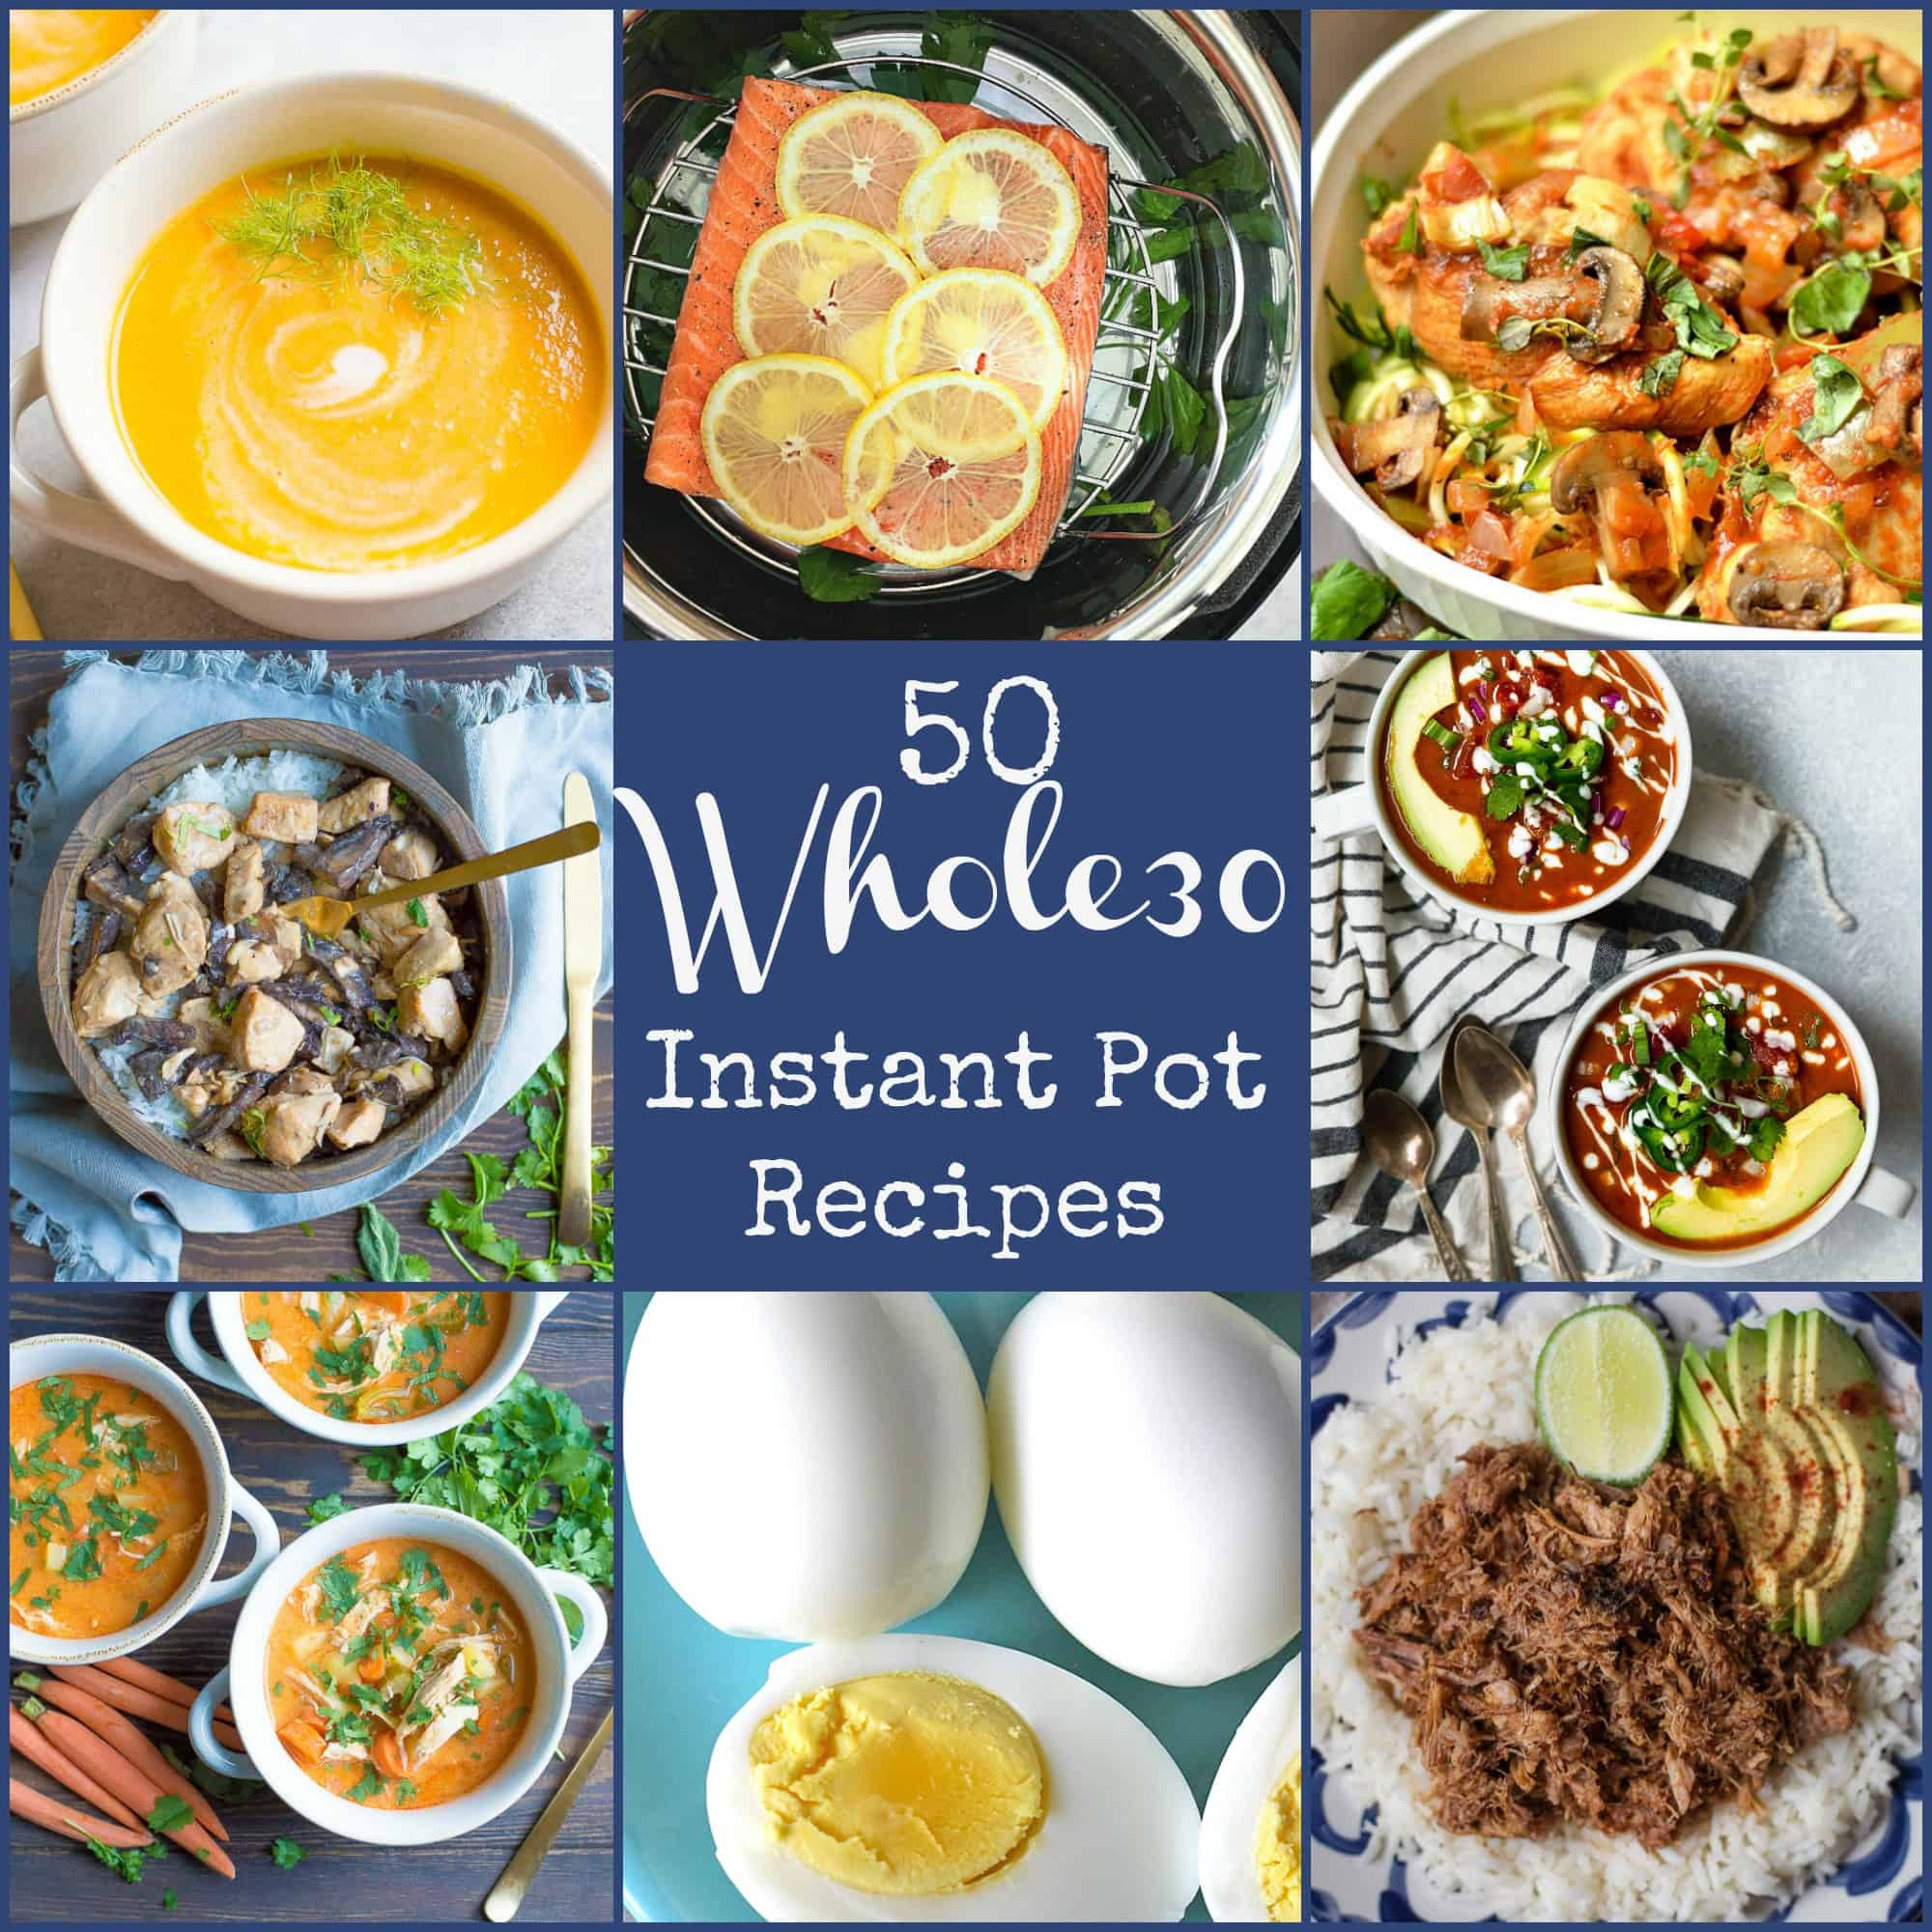 Instant Pot whole30 Recipes Beautiful 50 whole30 Instant Pot Recipes wholesomelicious